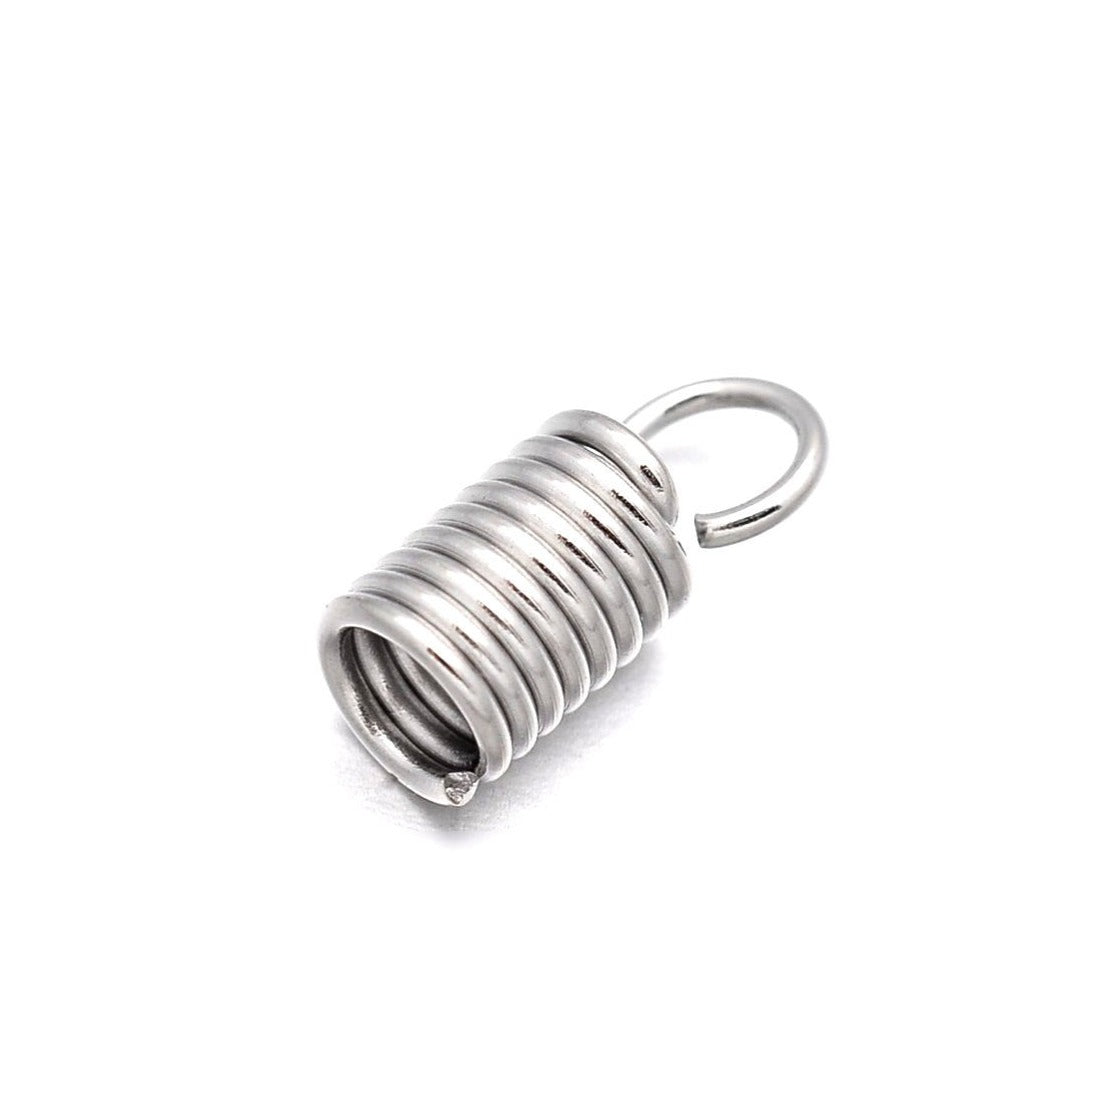 11x4.5mm Silver Cord Ends - Stainless steel spring coil ends - hypoallergenic necklace fasteners 20pcs